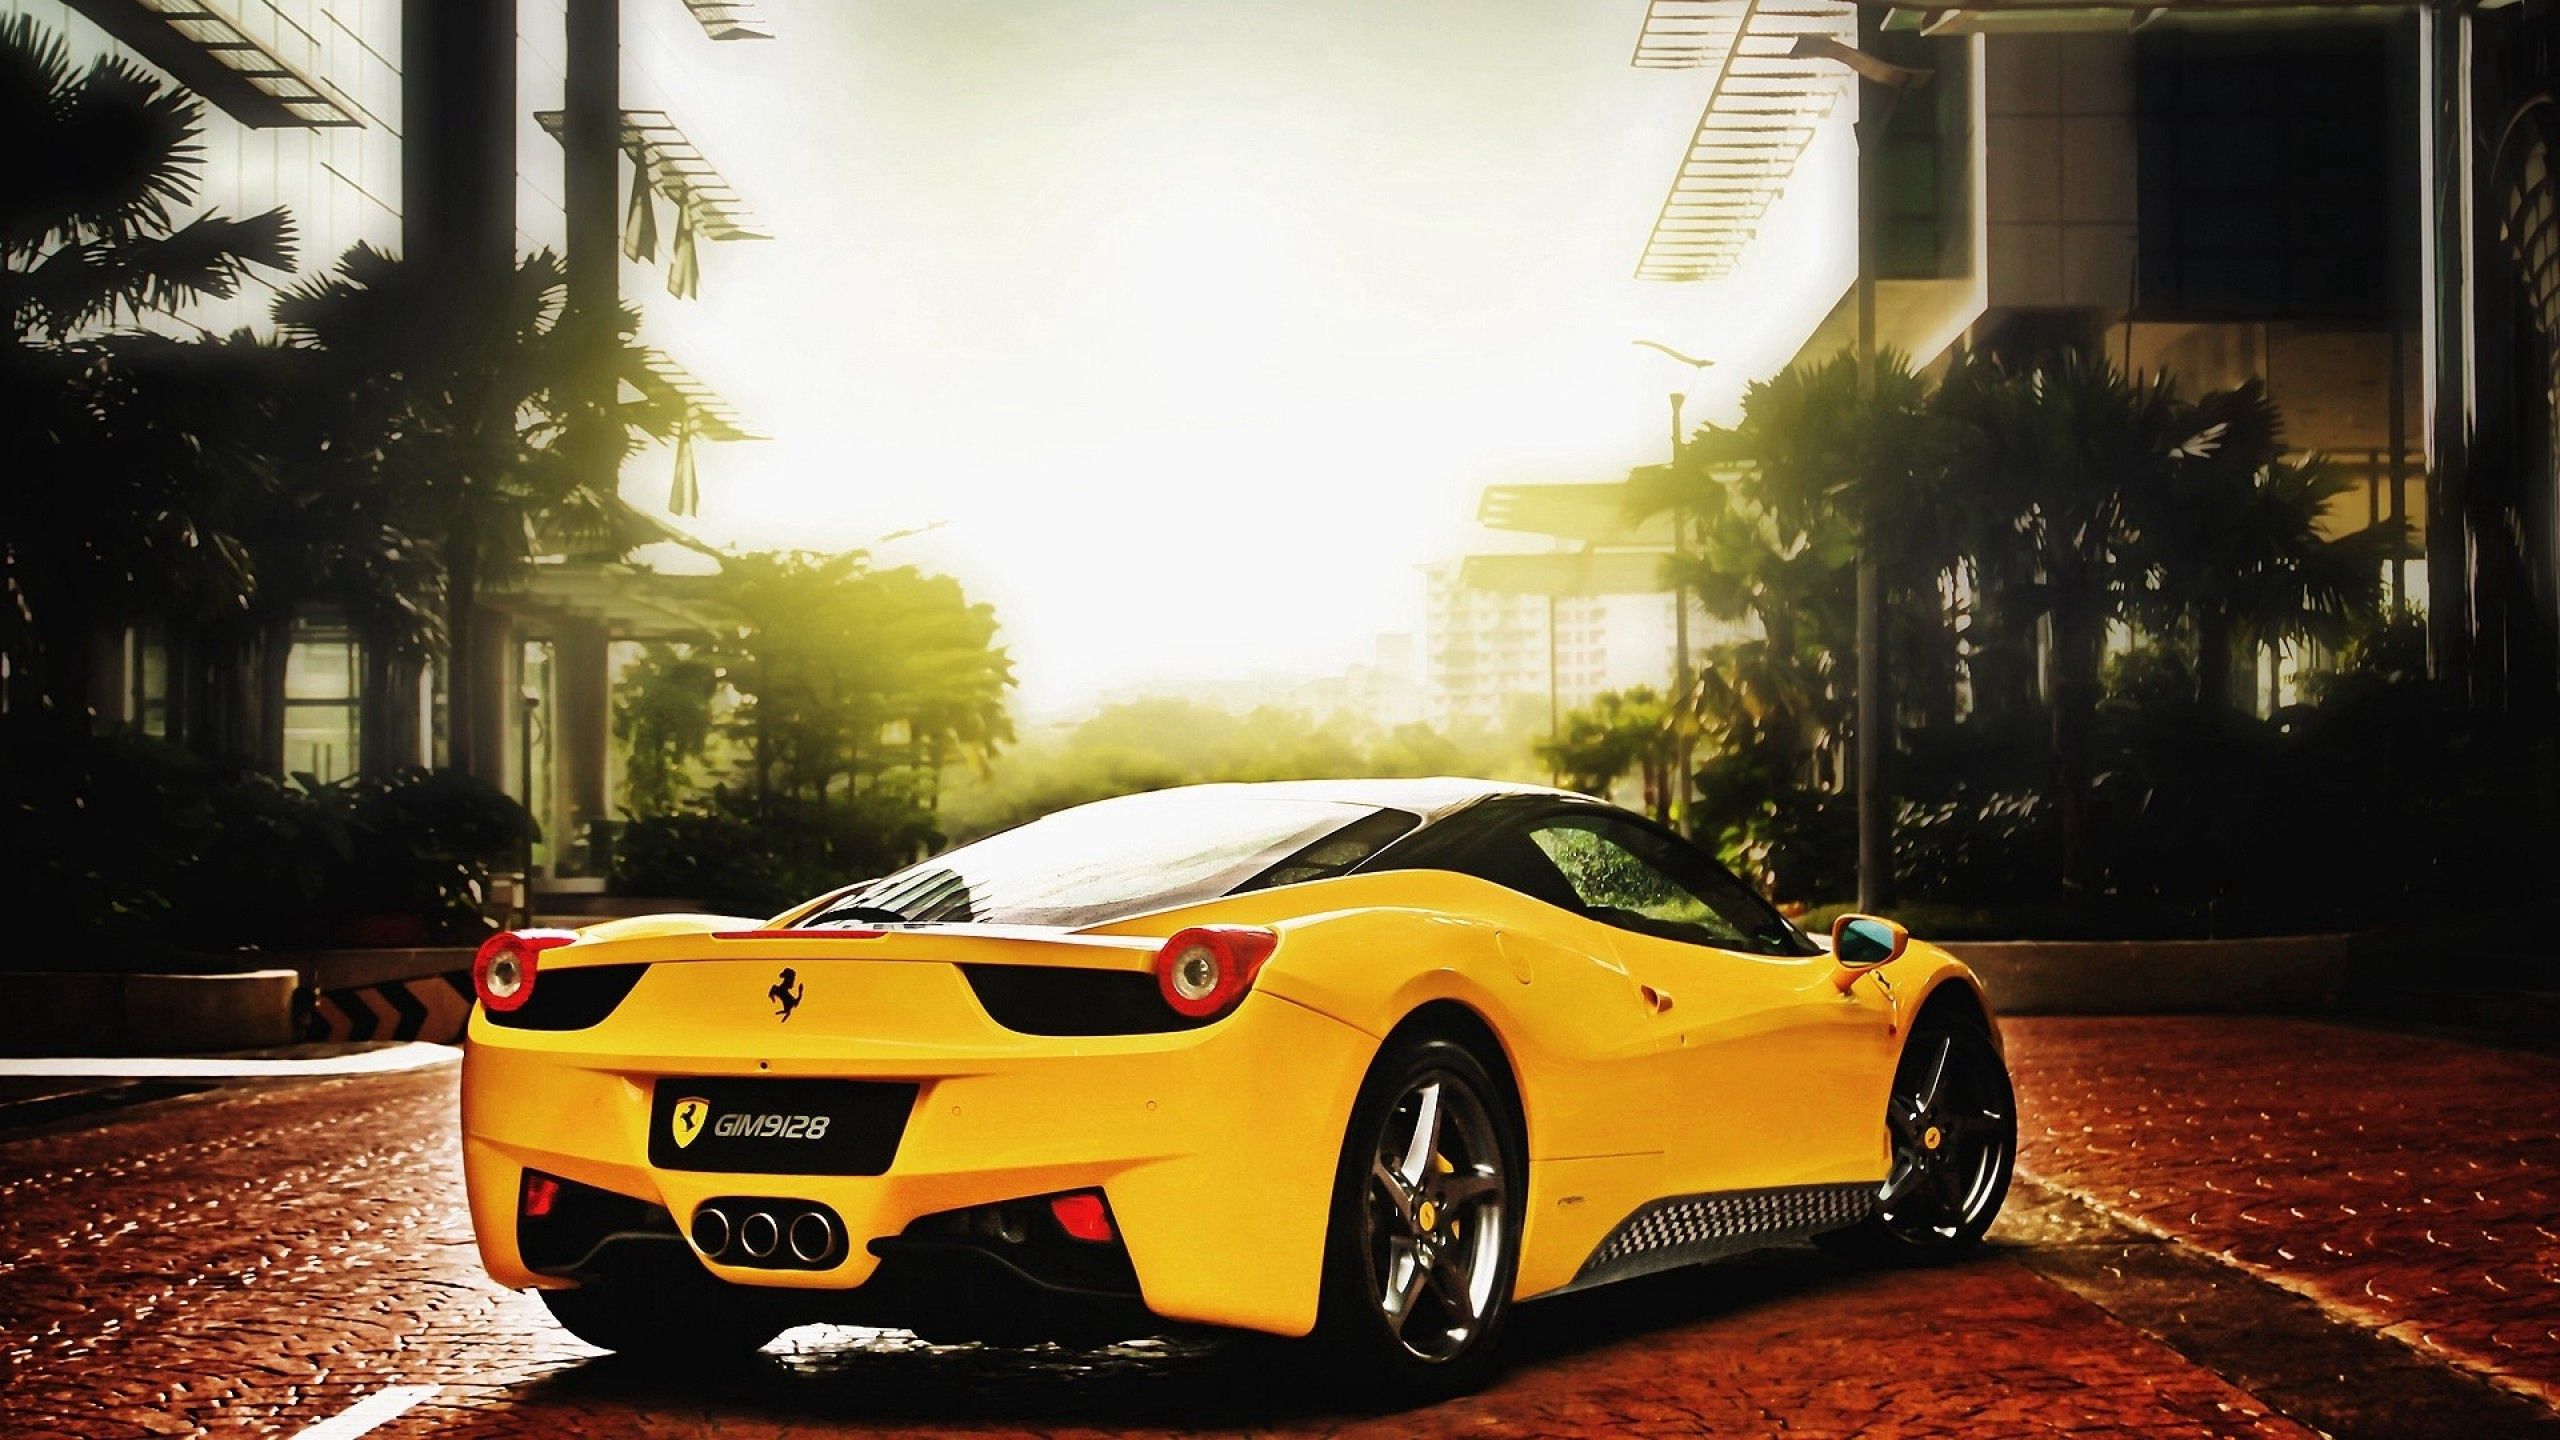 61313 free wallpaper 720x1520 for phone, download images yellow, cars, ferrari, road 720x1520 for mobile